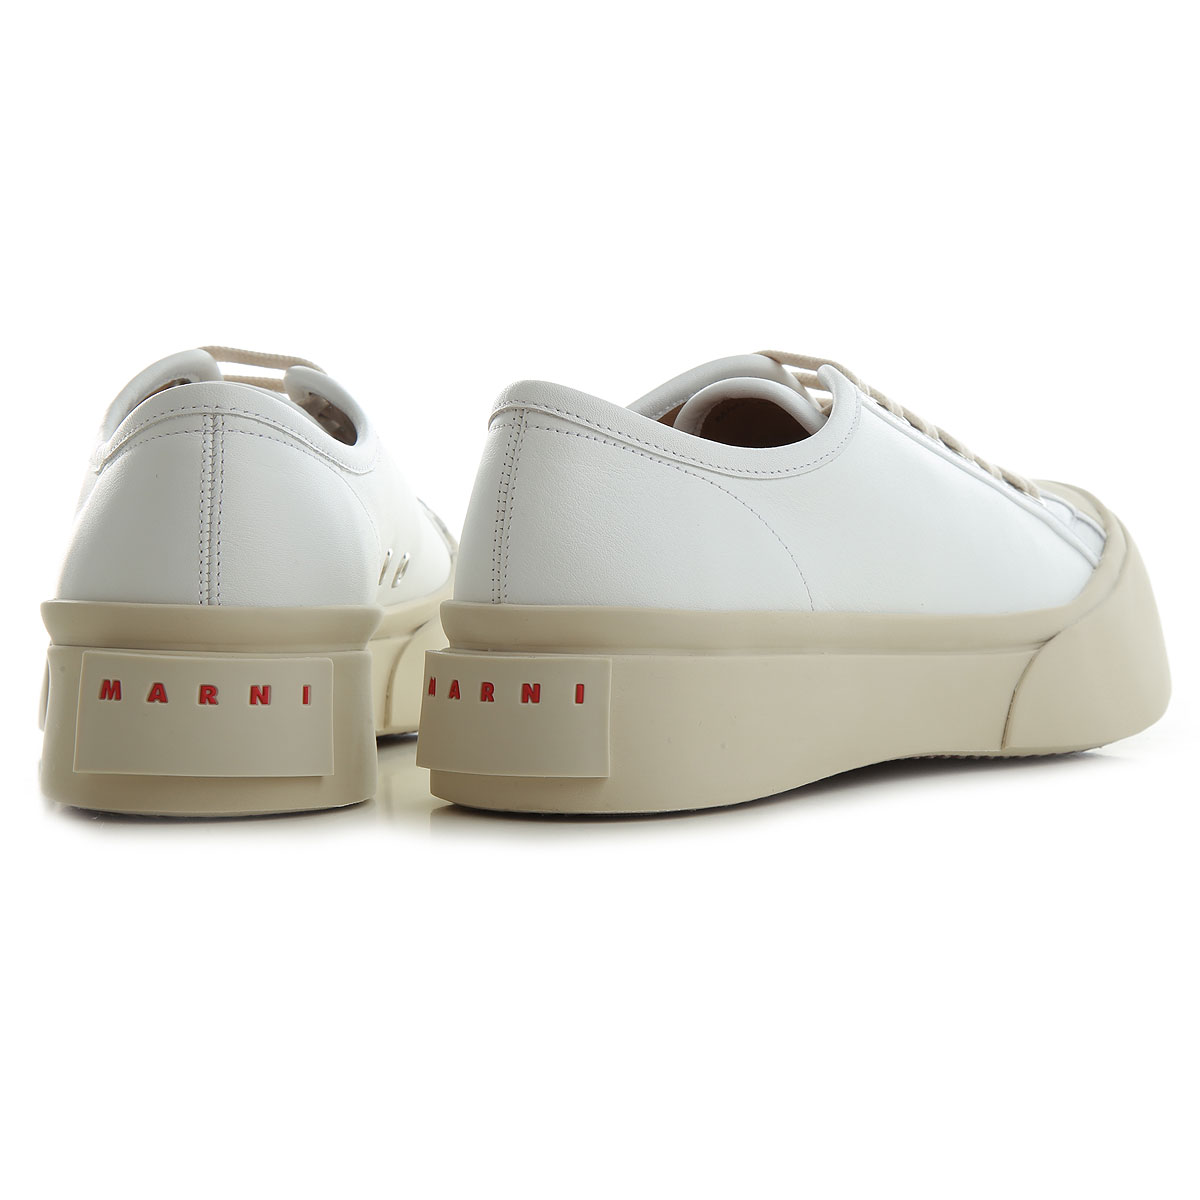 Womens Shoes Marni, Style code: snzw003020p2722-00w01-